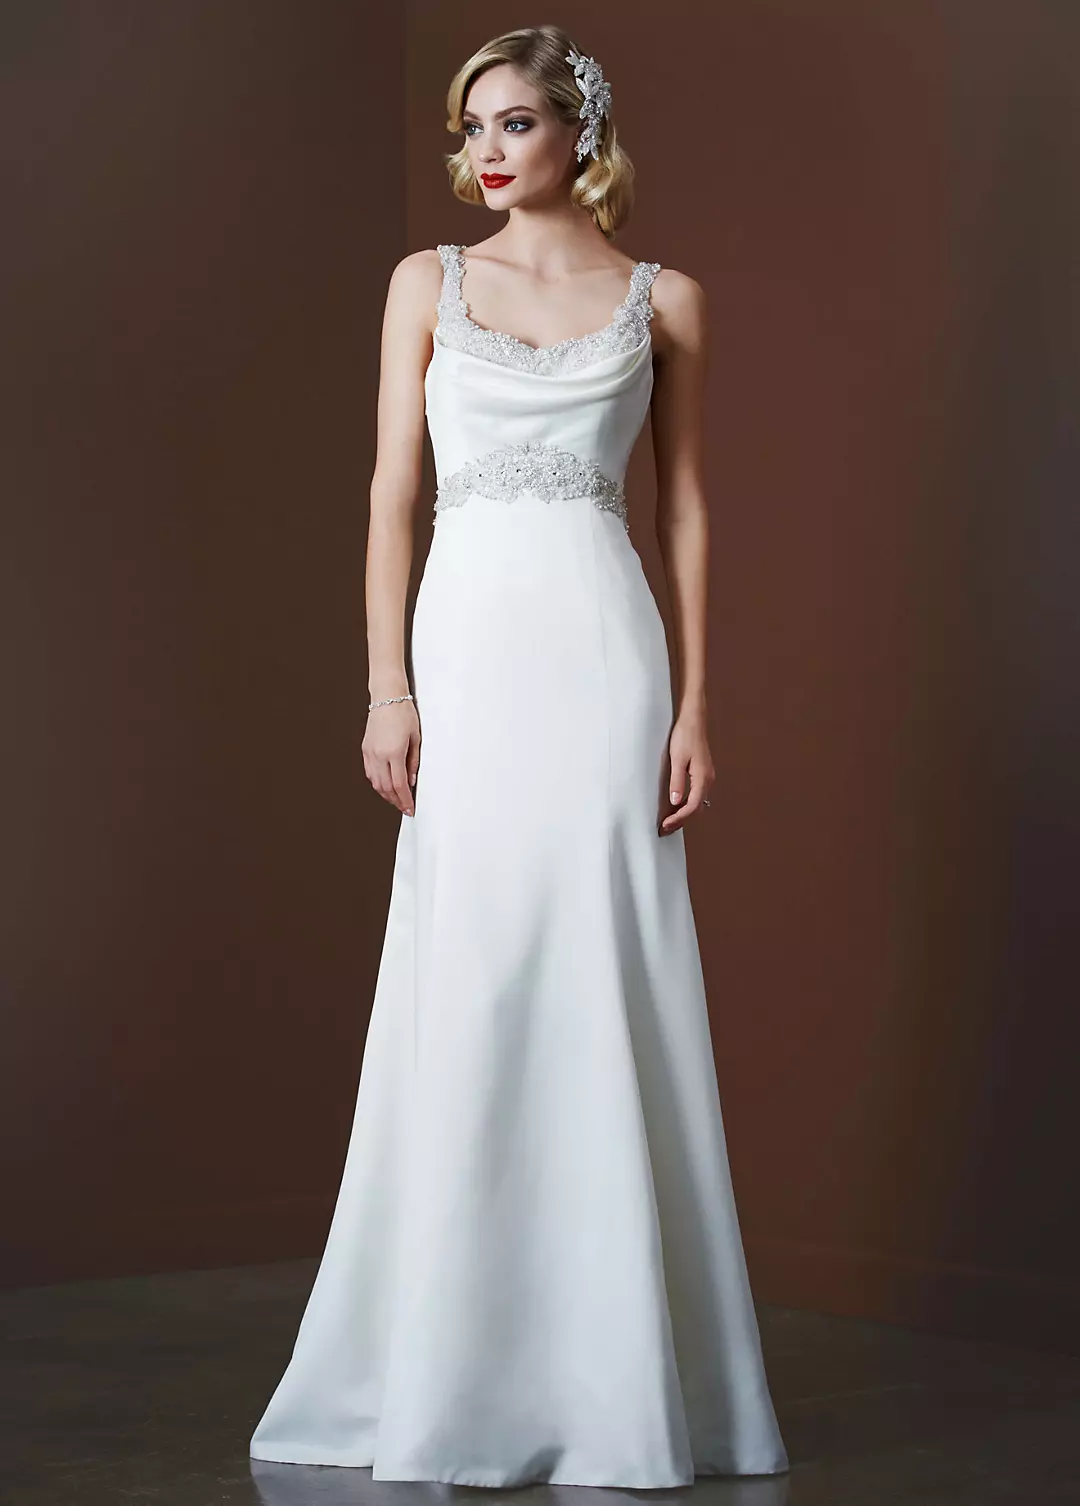 Satin Dress with Beaded Waist and Illusion Back Image